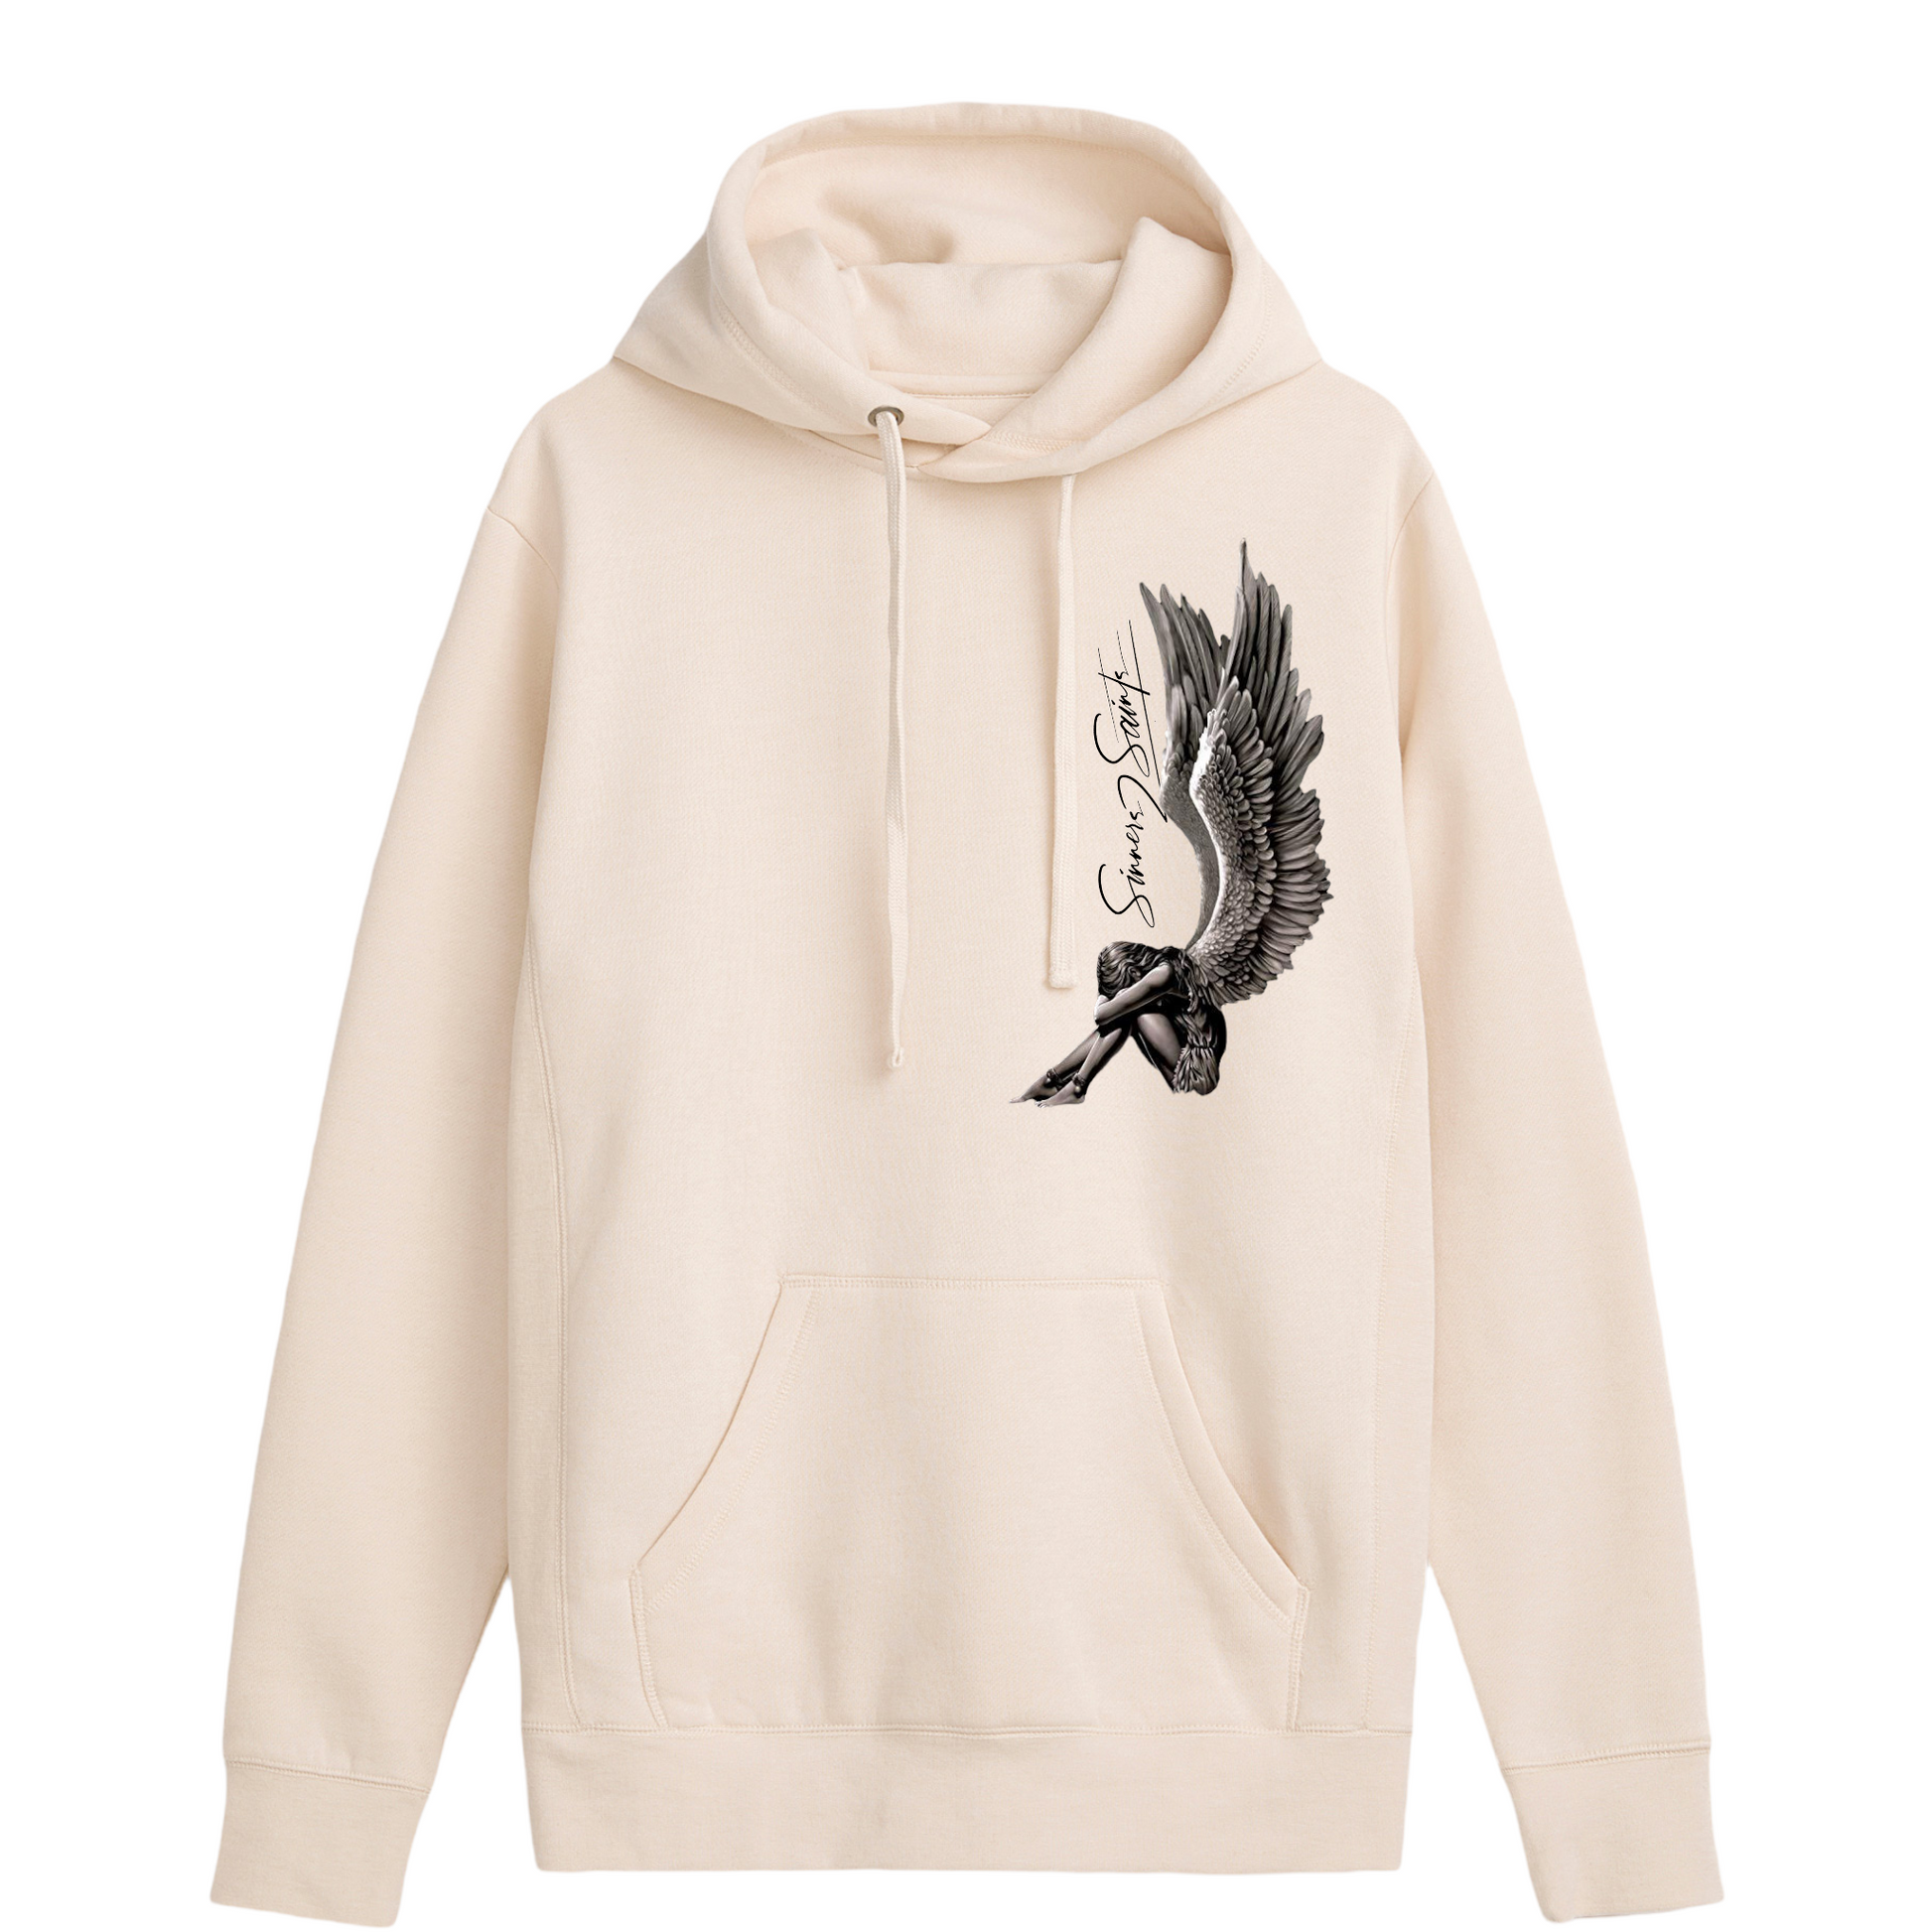 NEW SS22 Creme/Beige Color Hoodie “Not Alone, with Dear God” Drop 1 Collection - Men and Women sizes **Limited Edition only** - TheSinners2Saints